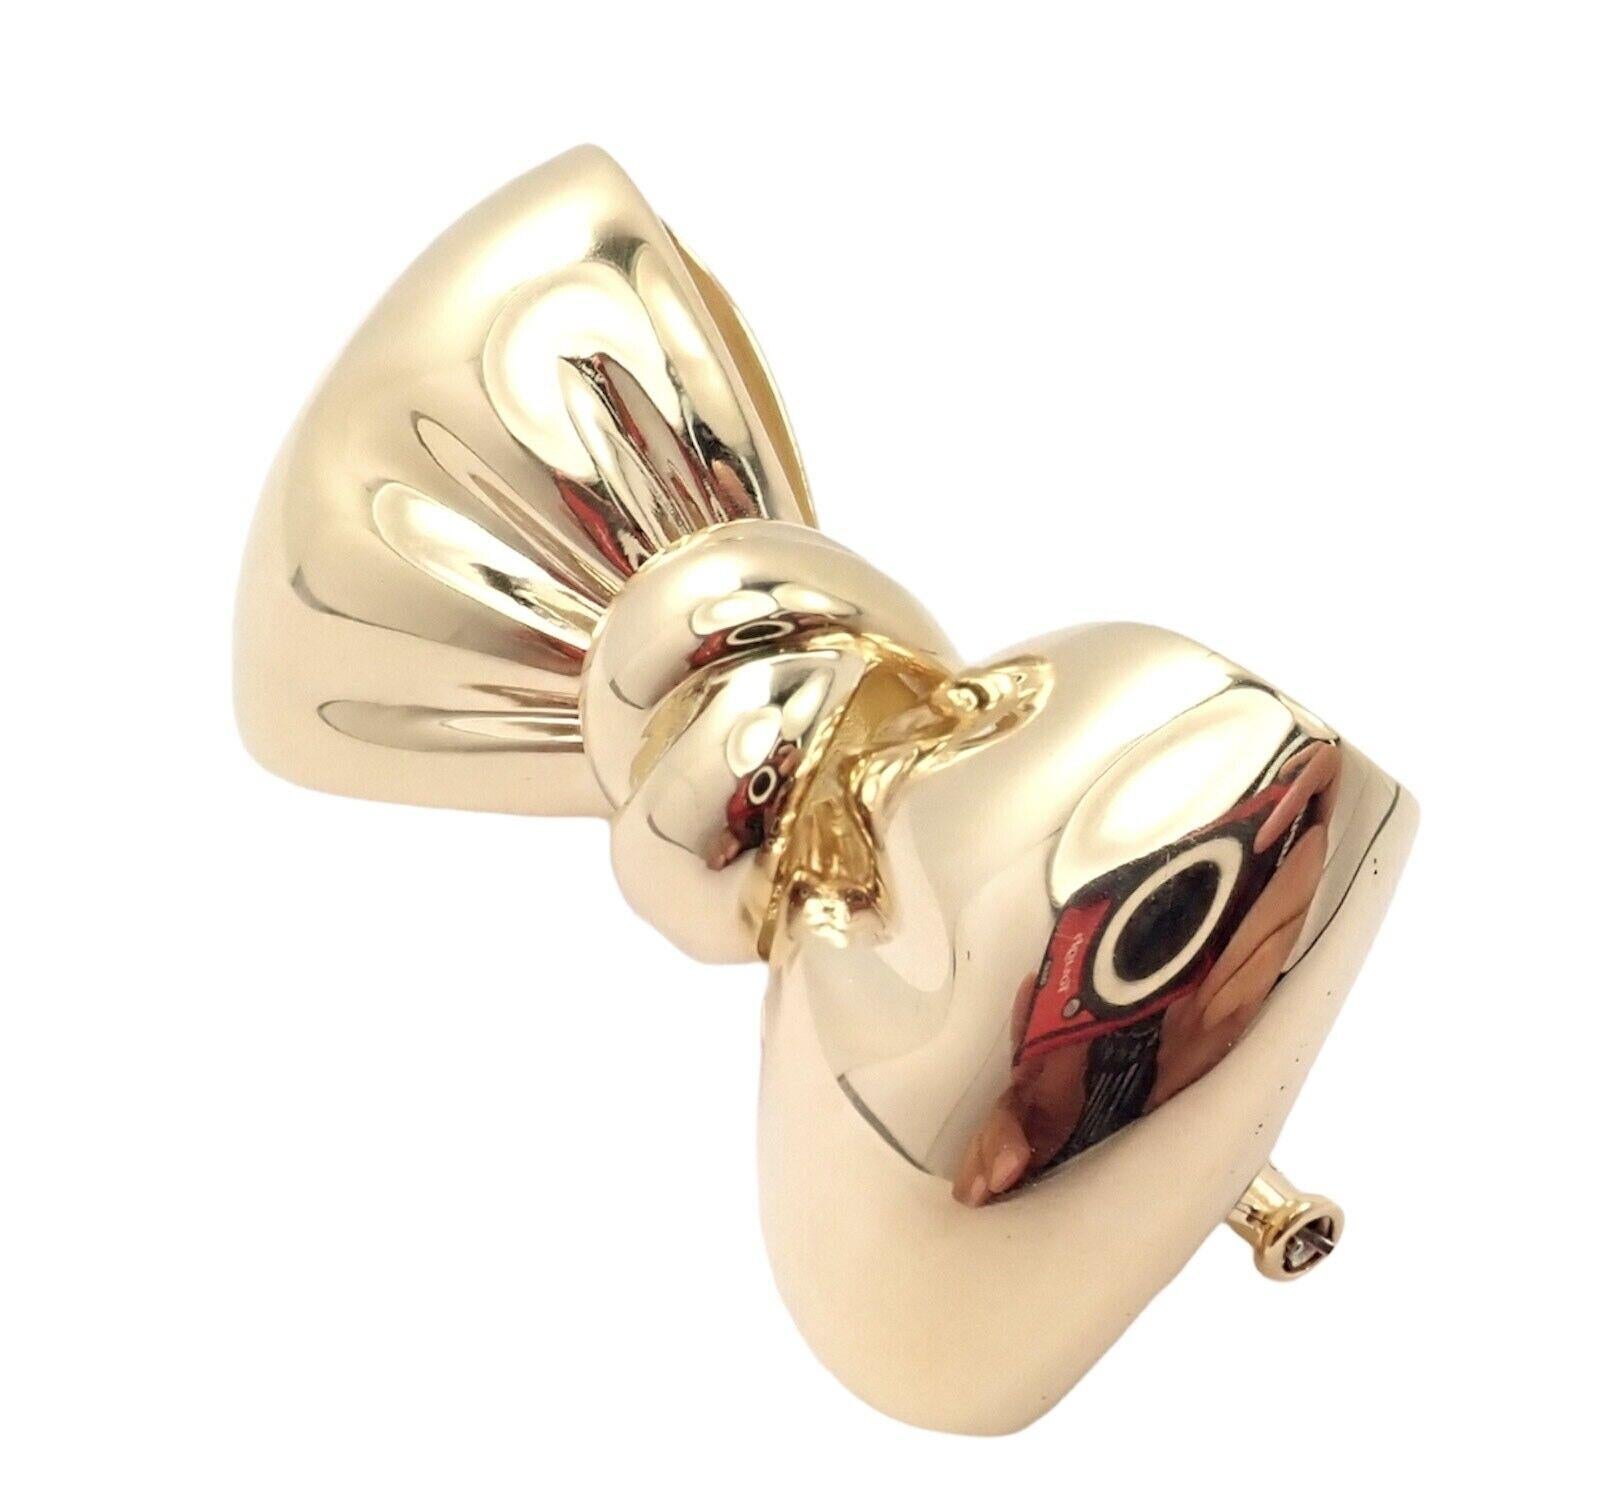 18k Yellow Gold Bow Design Vintage Brooch Pin by Van Cleef & Arpels.
Details: 
Weight: 26 grams
Measurements: 43mm x 22mm
Stamped Hallmarks: VCA 750 DR01.00YG 36
*Free Shipping within the United States*
YOUR PRICE: $6,000
T2913orrd